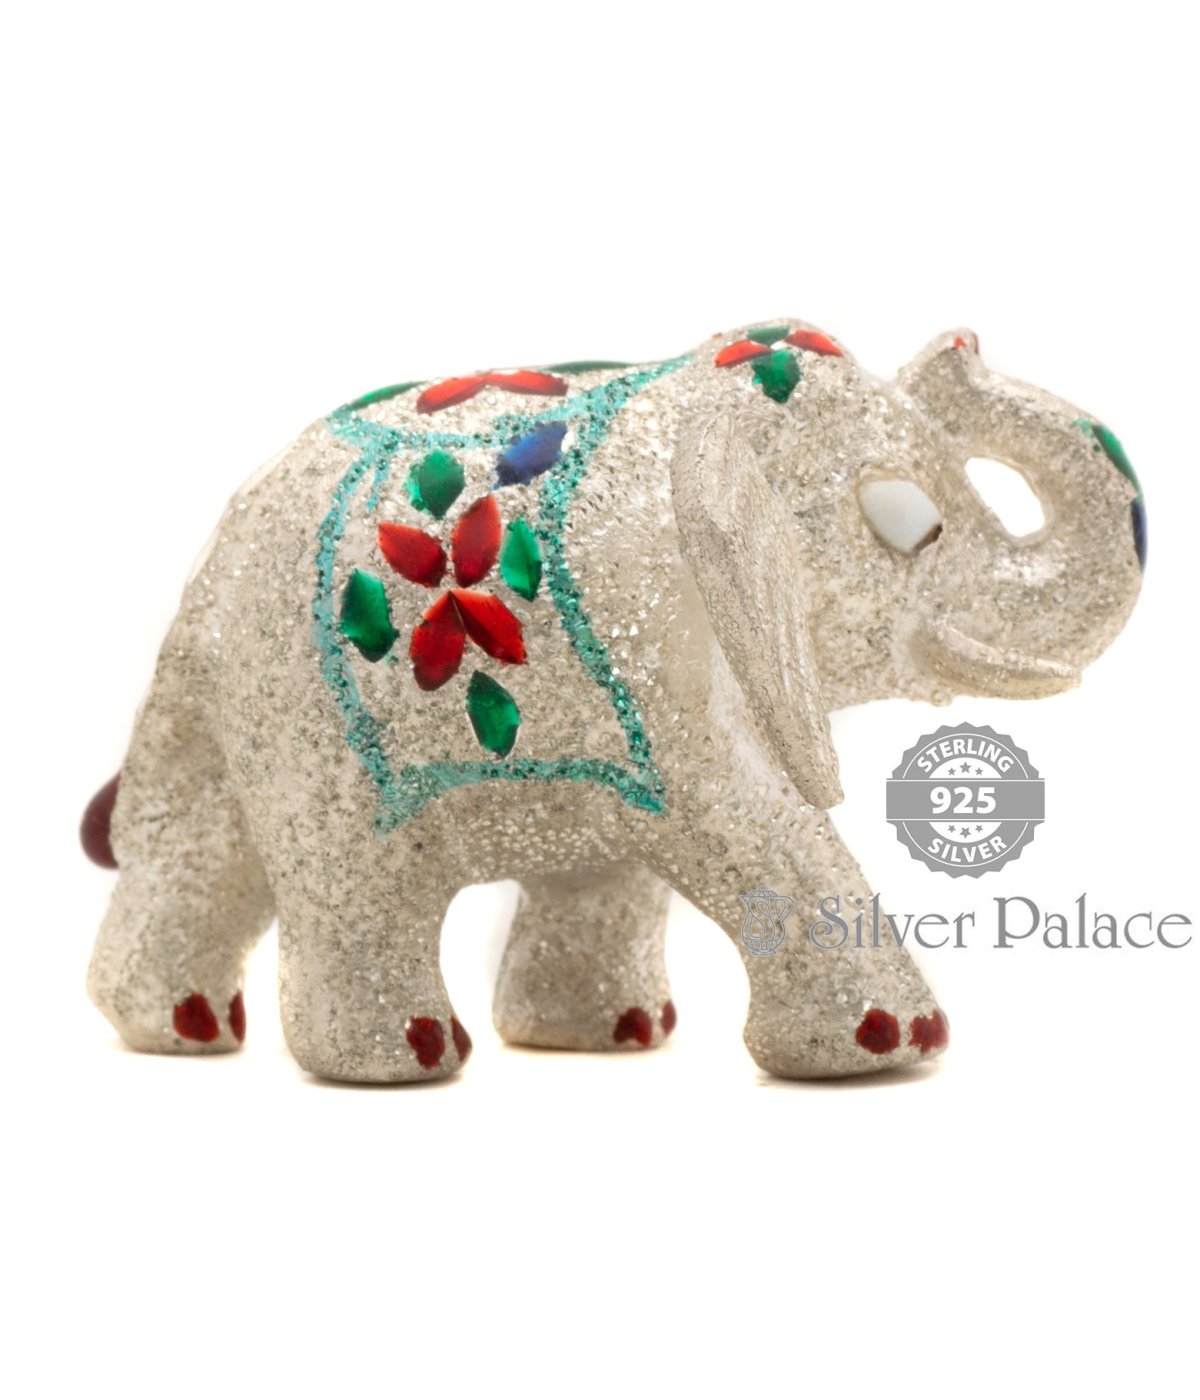 925 STERLING SILVER ELEPHANT STATUE 